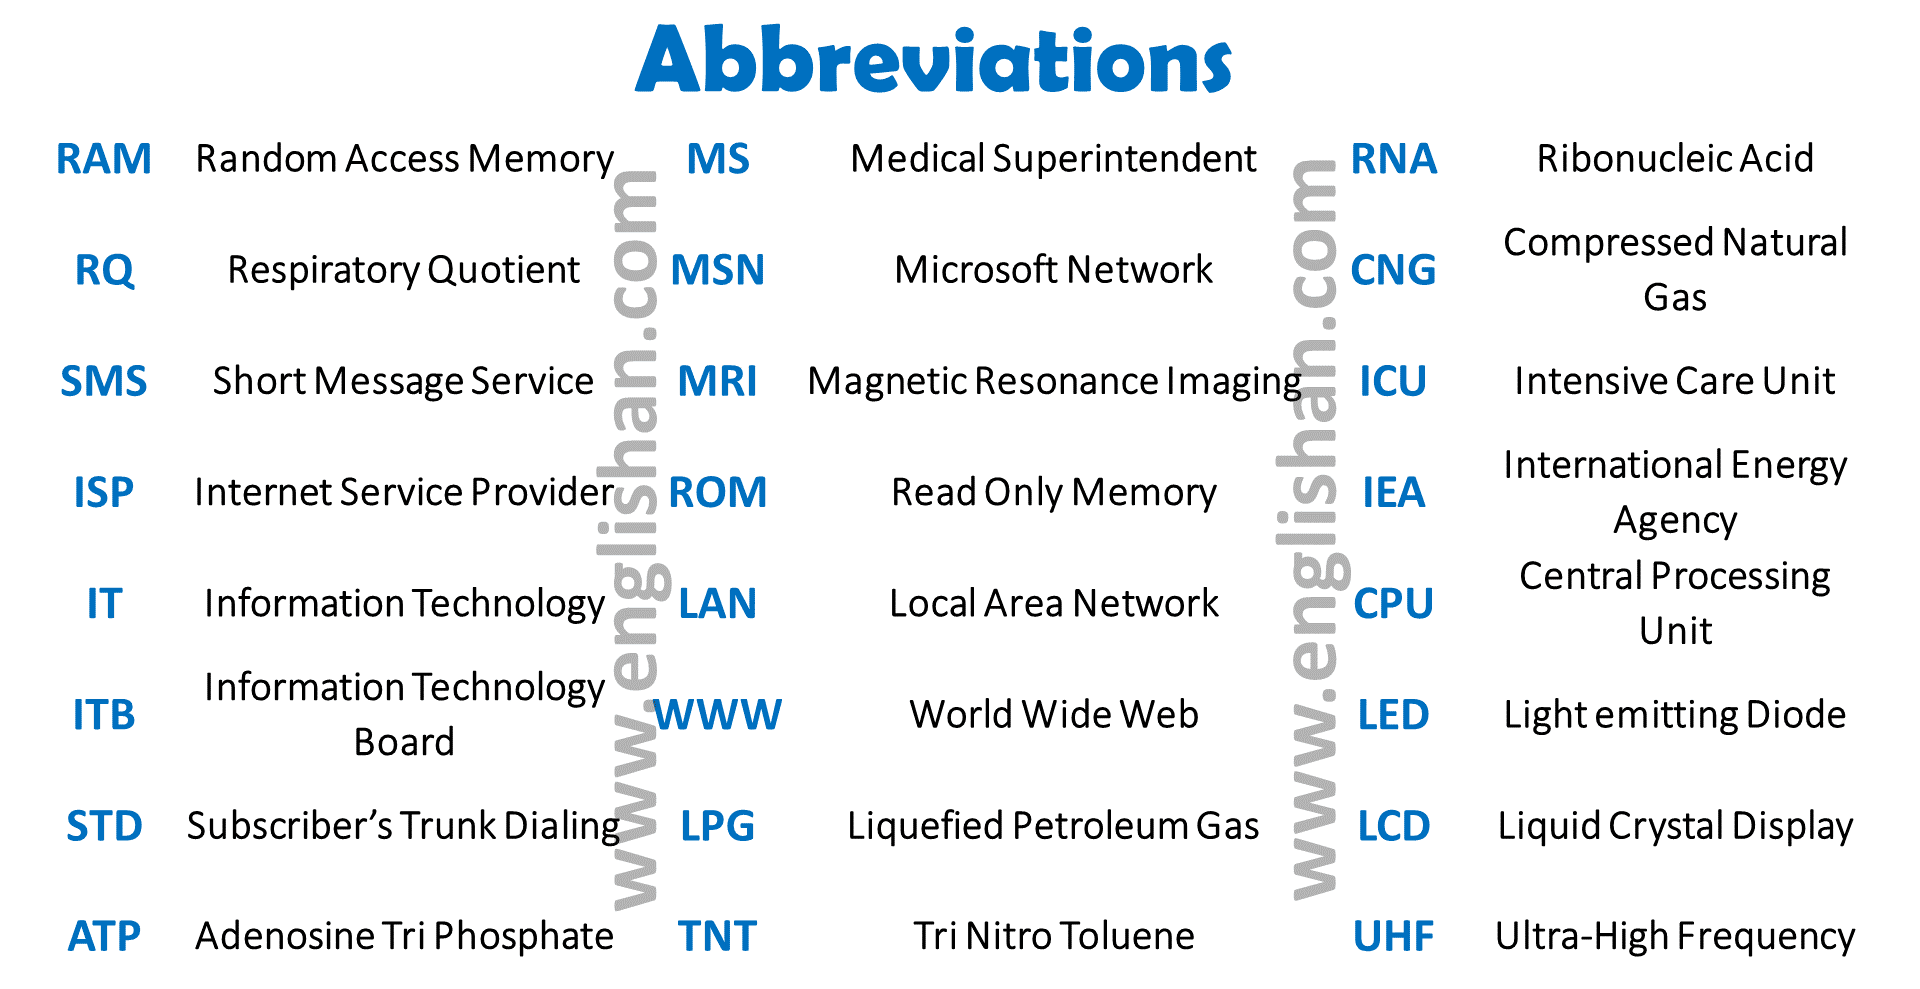 Useful List Of Common English Abbreviations